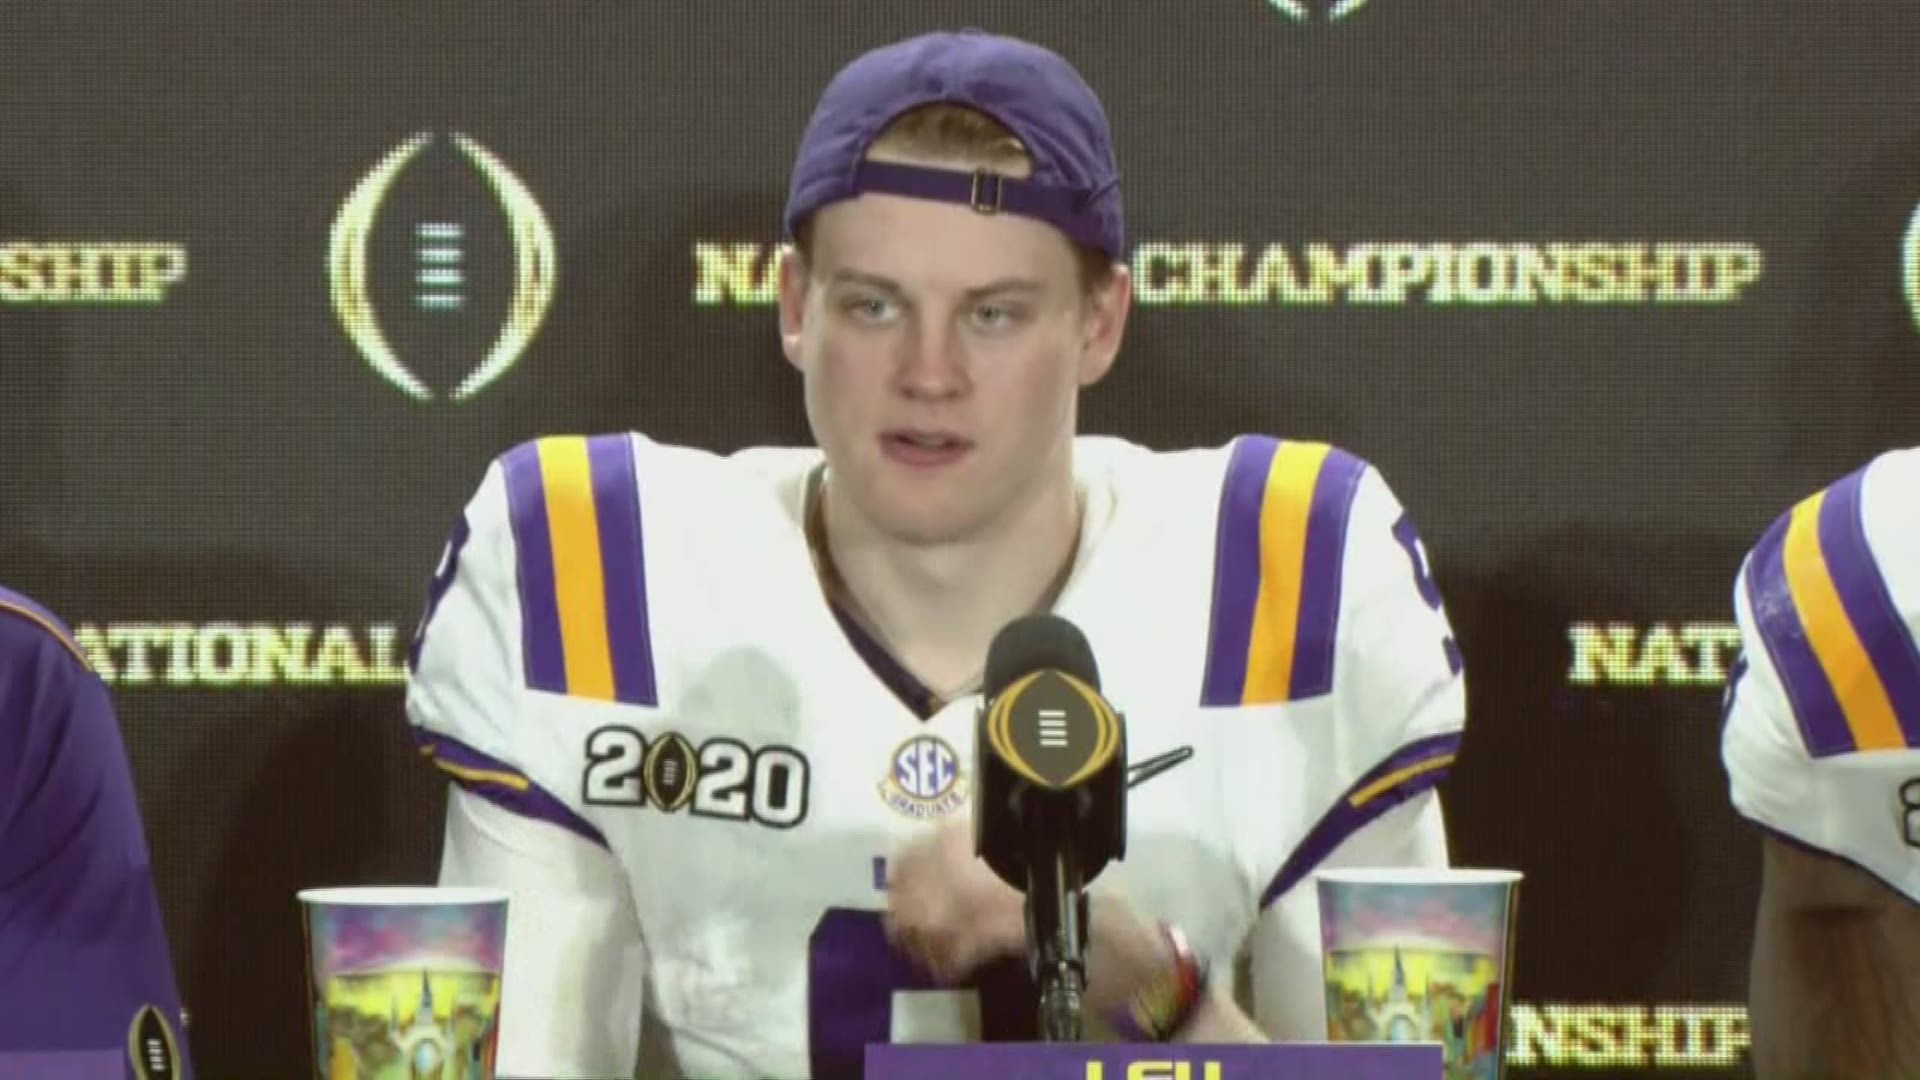 LSU's Heisman Trophy quarterback Joe Burrow talks about what the championship season means to he and the team.